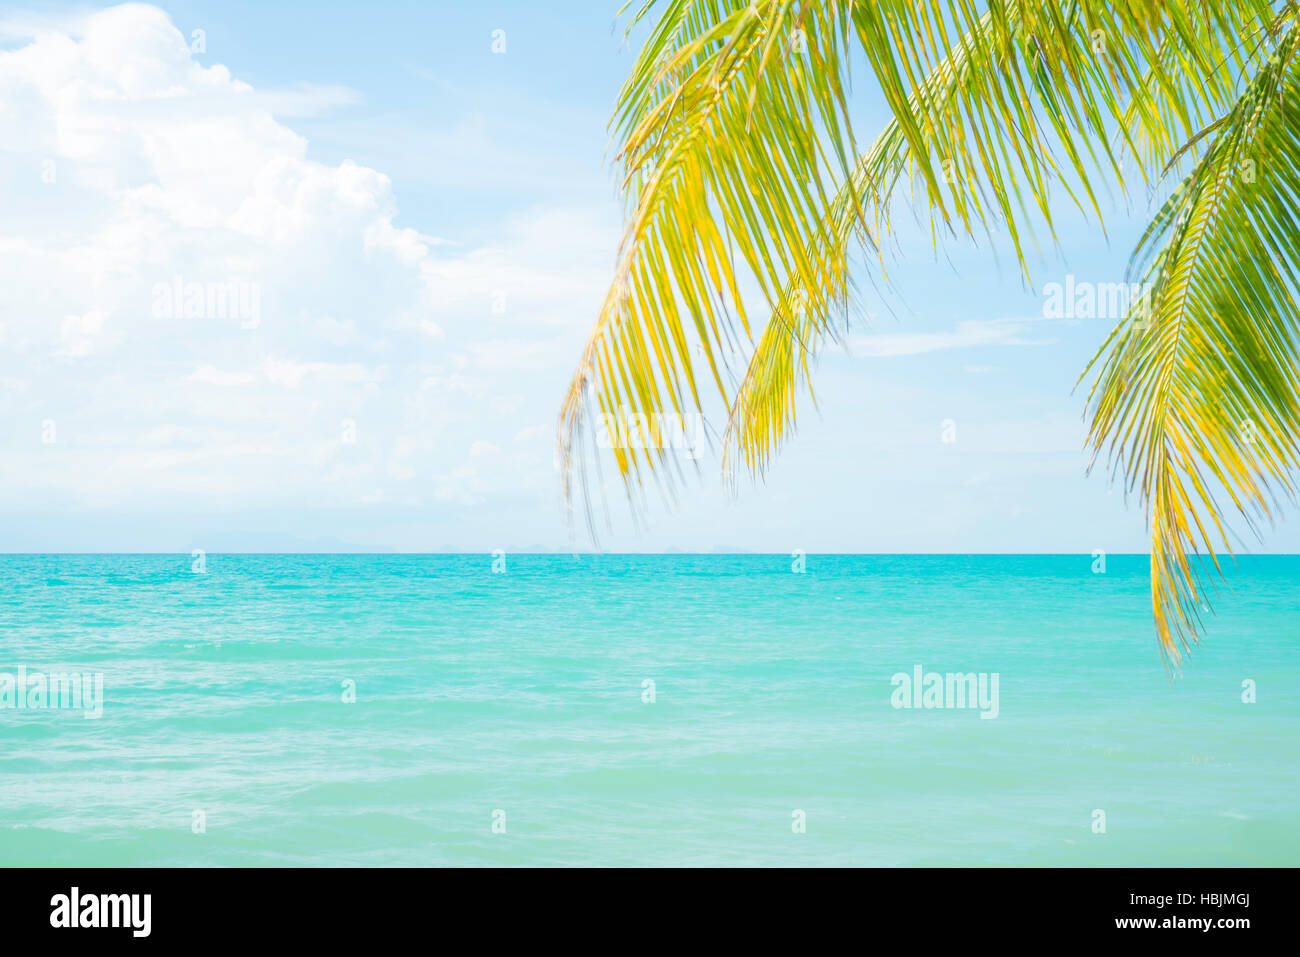 Beautiful, quiet and calm tropical seaside with blue sky and water. A coconut palm leaf can be seen by the edge. Stock Photo